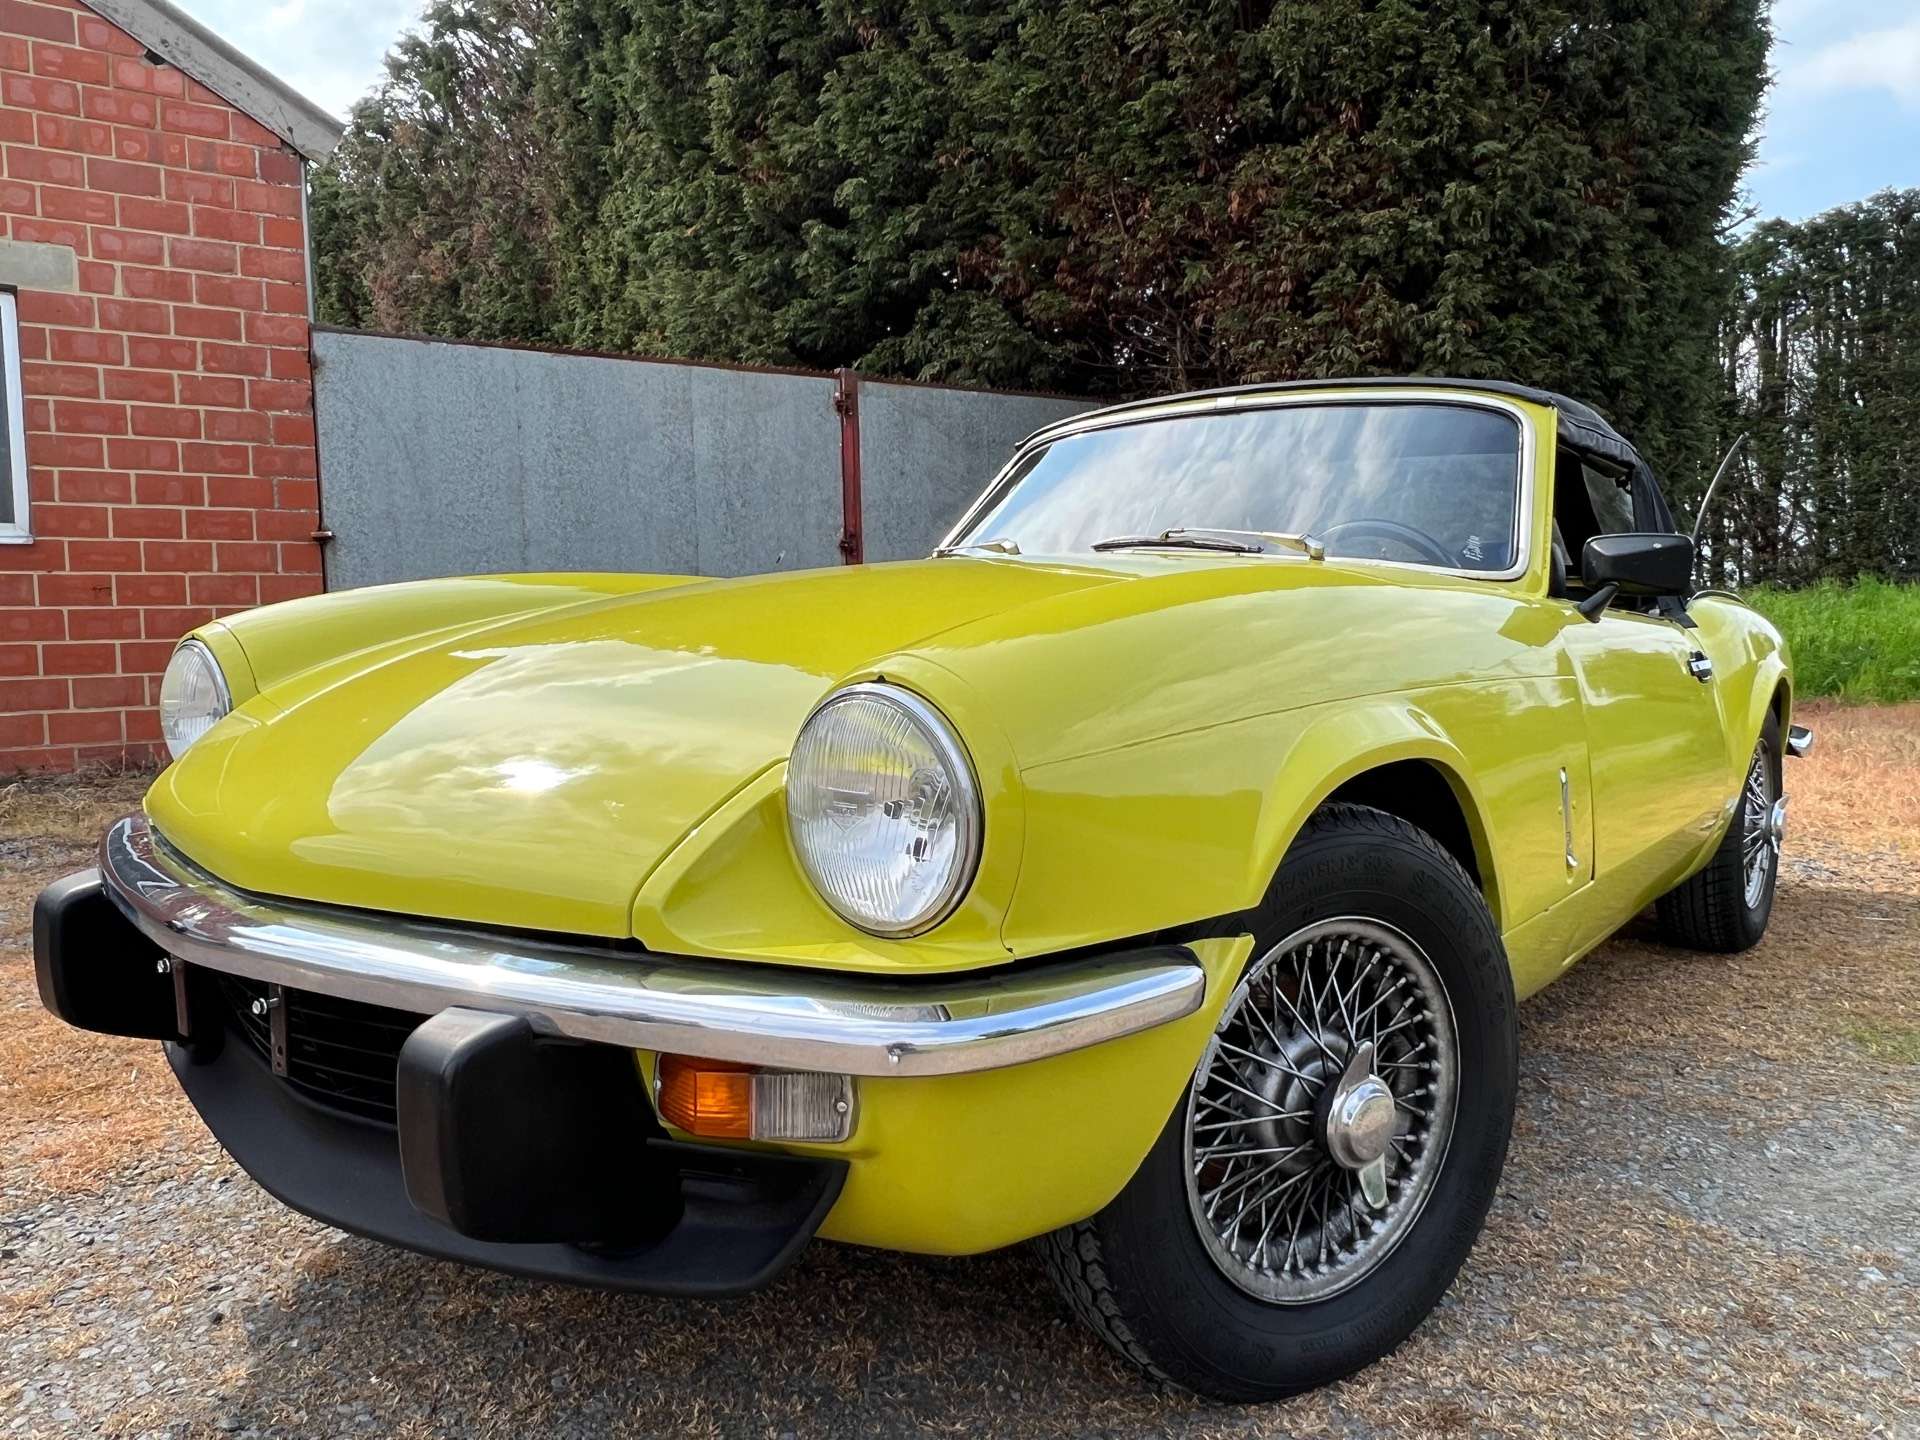 Triumph Spitfire Other in Yellow used in LEVAL-traheignies for € 12,990.-